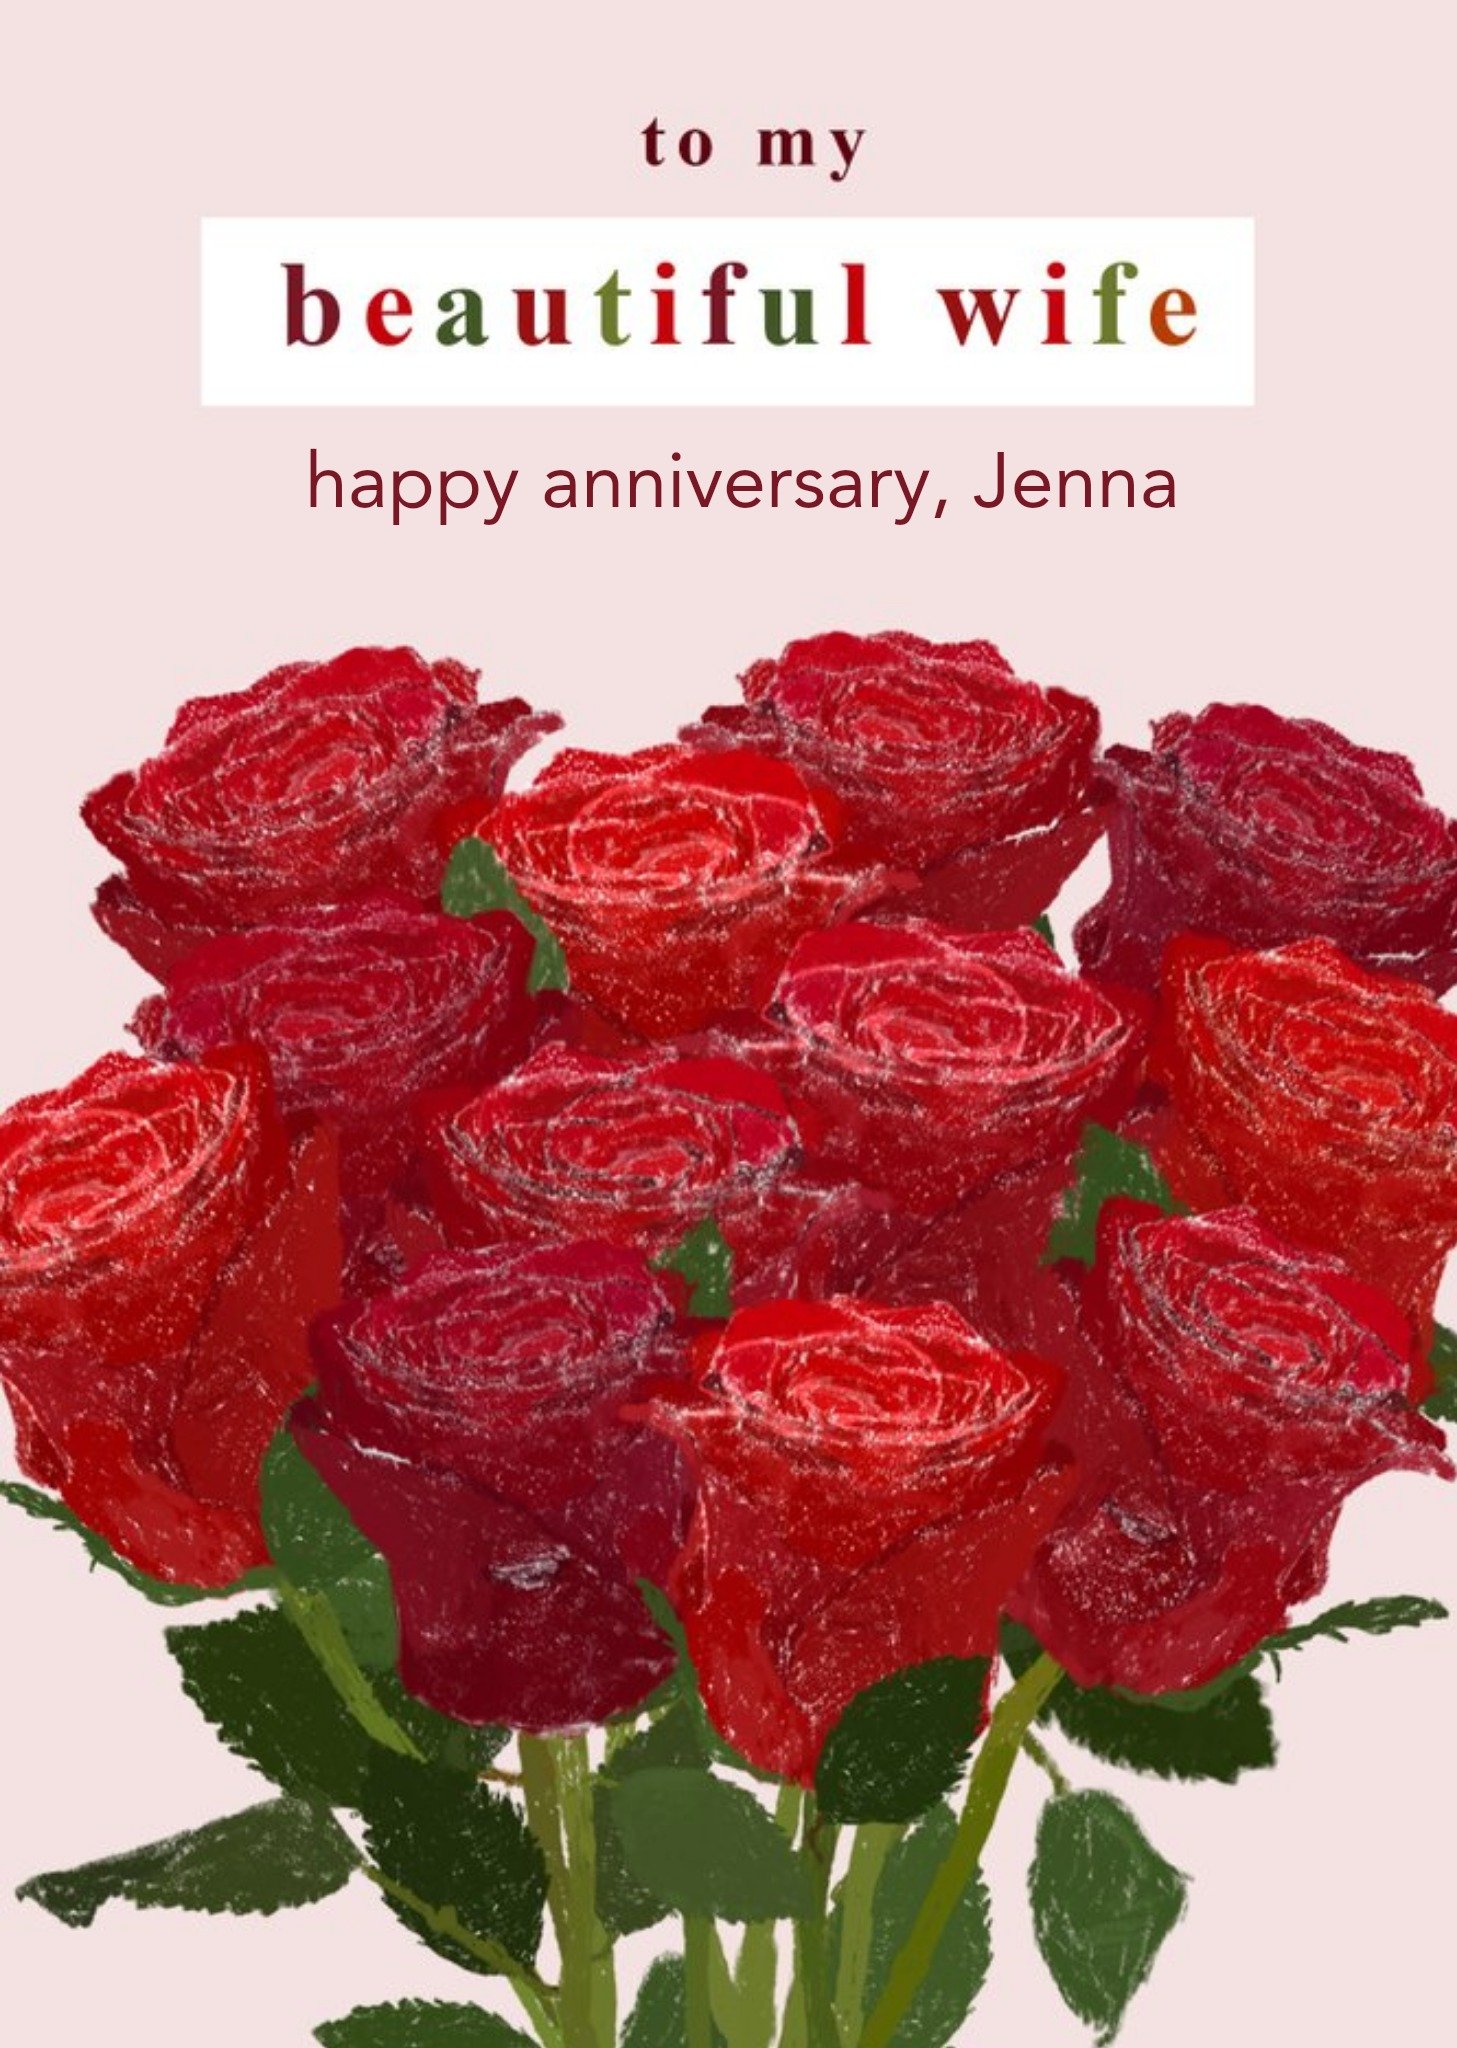 Moonpig Illustration Of A Bunch Of Red Roses Wife's Anniversary Card, Large